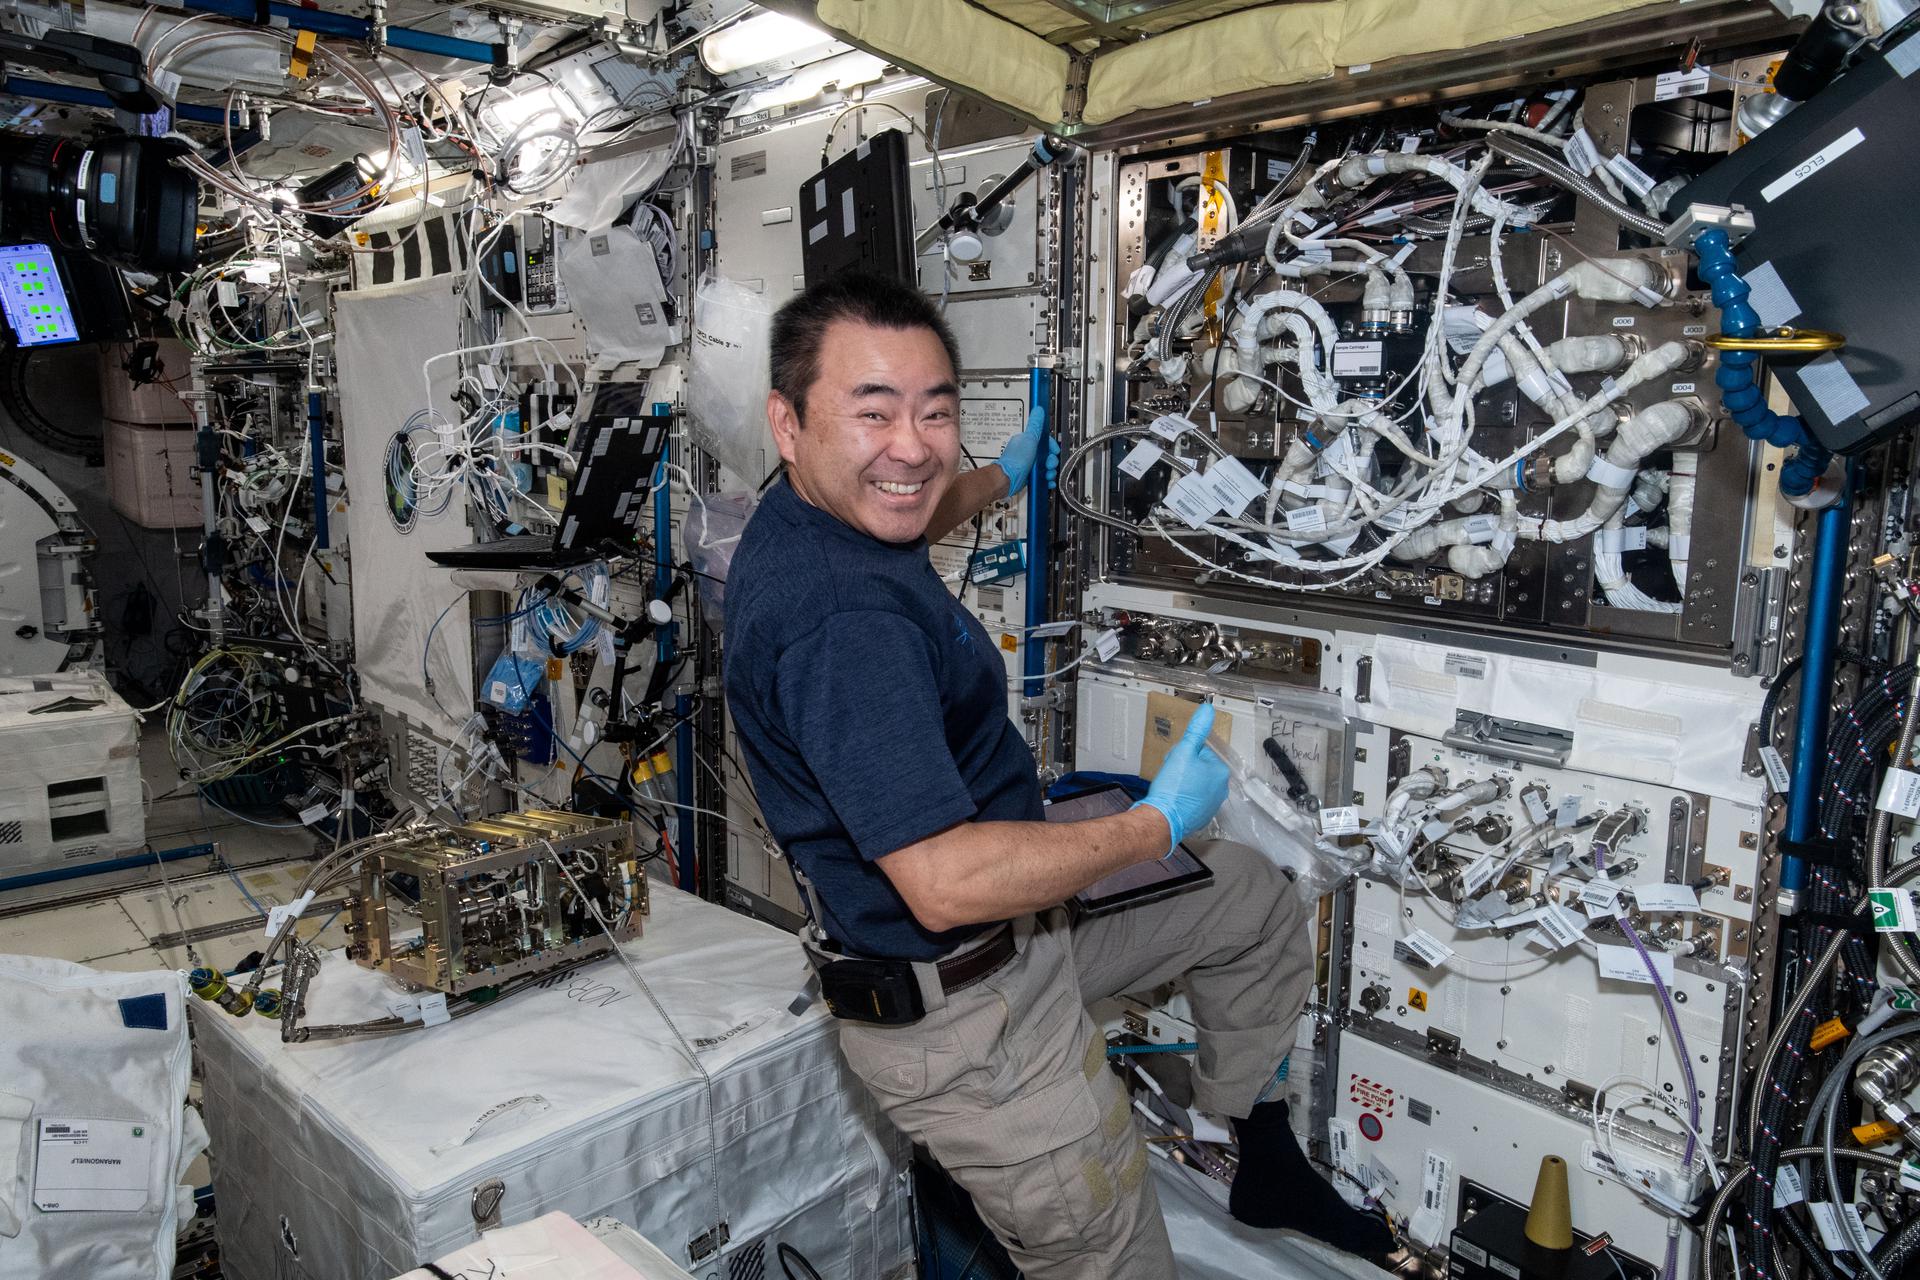 A Japanese astronaut smiles at the camera as he installs equipment against a wall of wires and hardware.